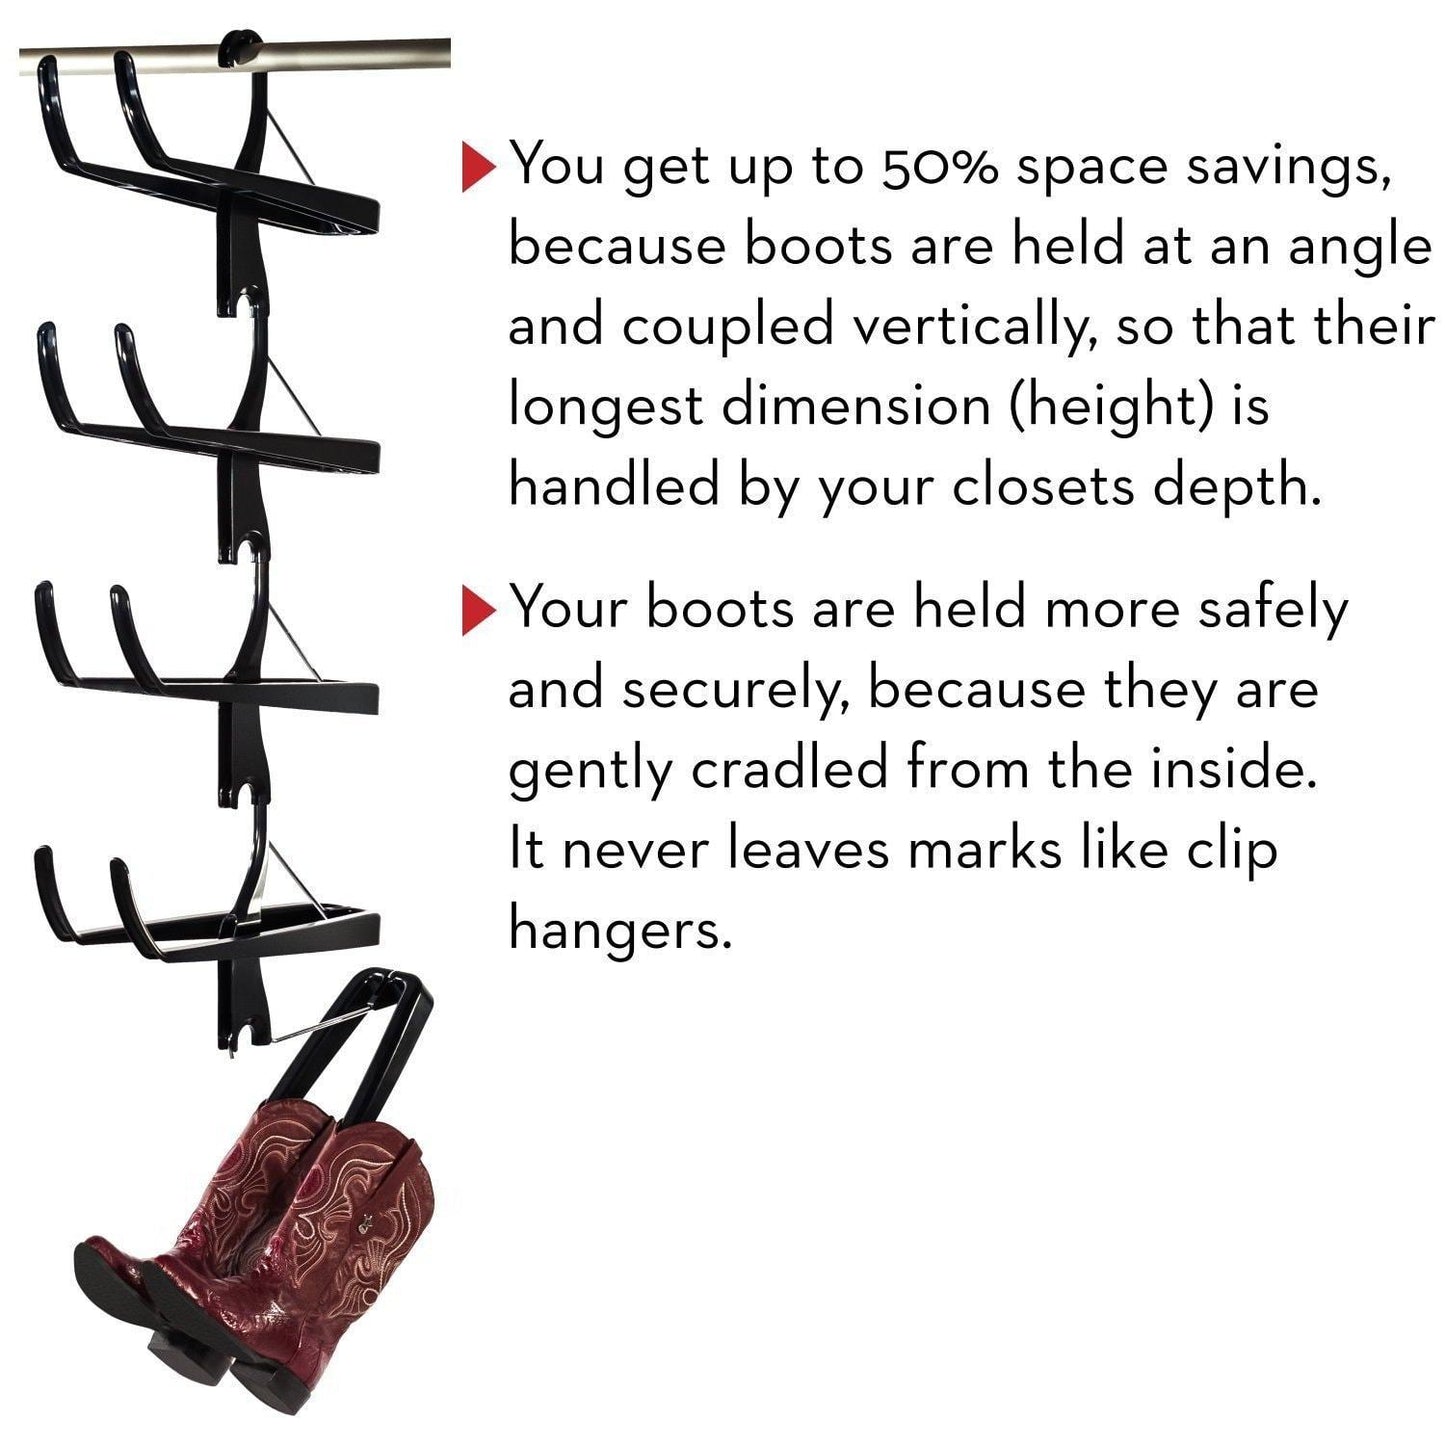 Discover the best boot butler boot storage rack as seen on rachael ray clean up your closet floor with hanging boot storage easy to assemble built to last 5 pair hanger organizer shaper tree